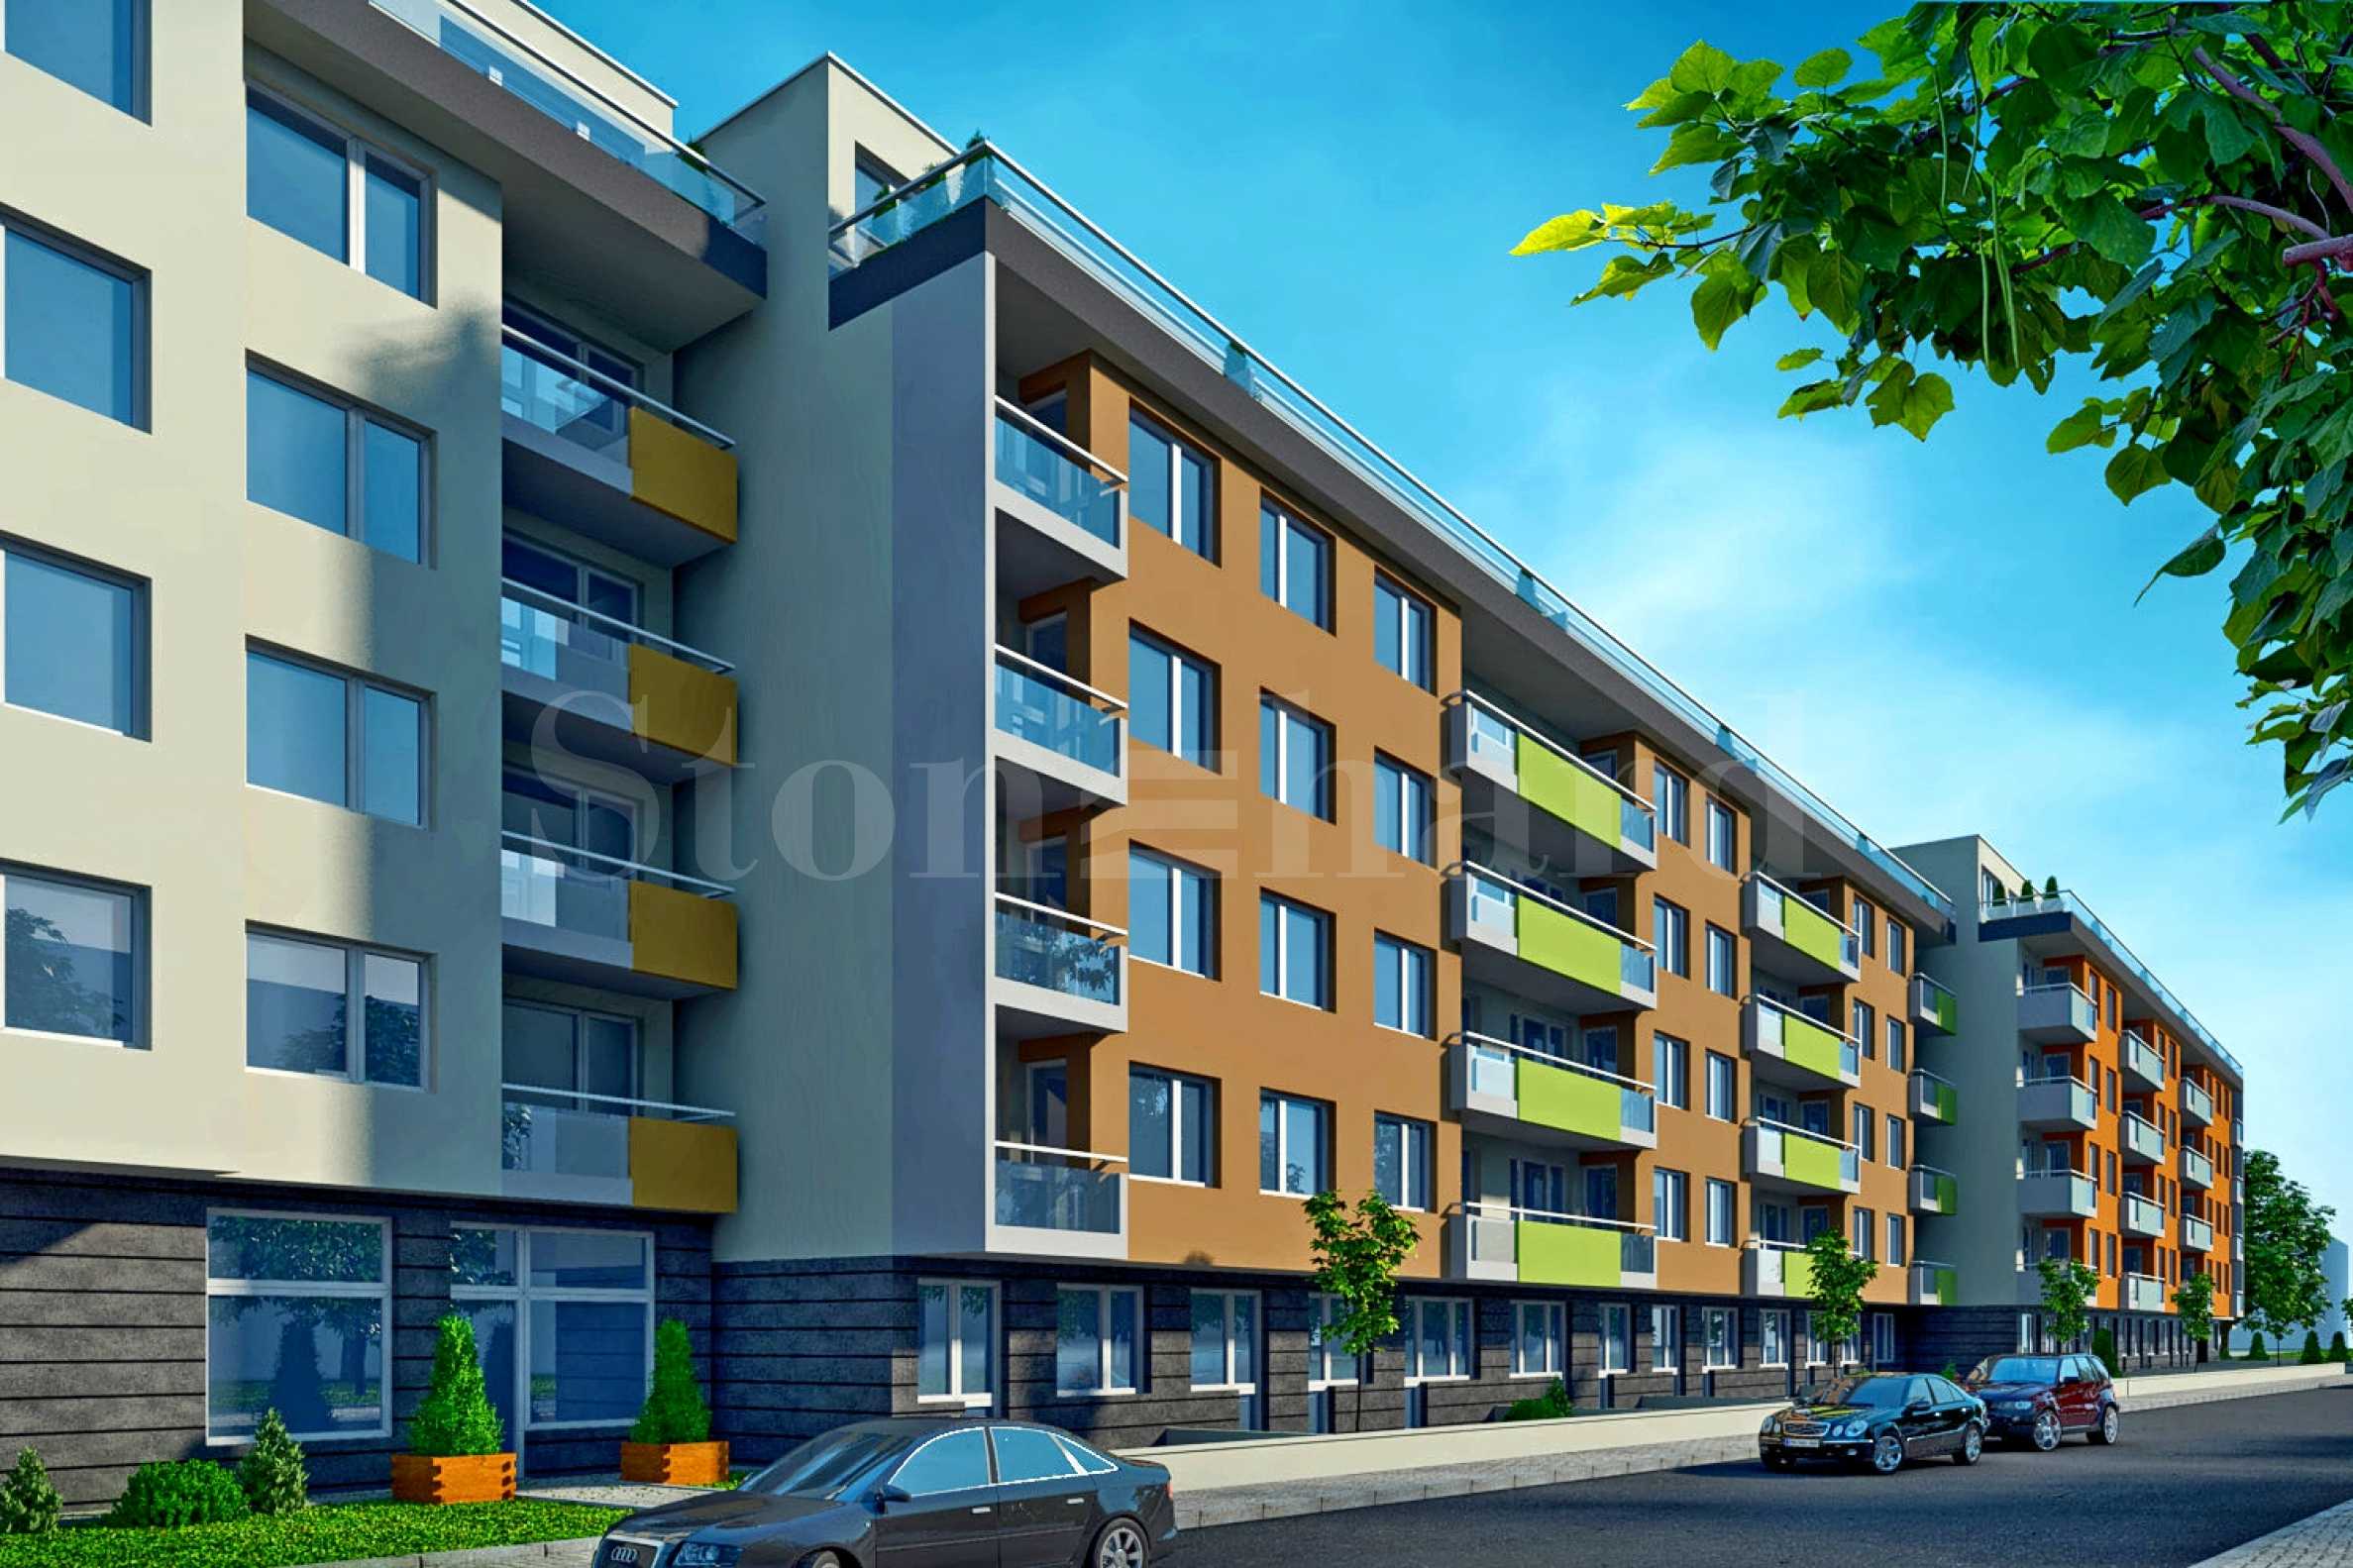 Newly-built apartments in the southern part of the city of Plovdiv1 - Stonehard